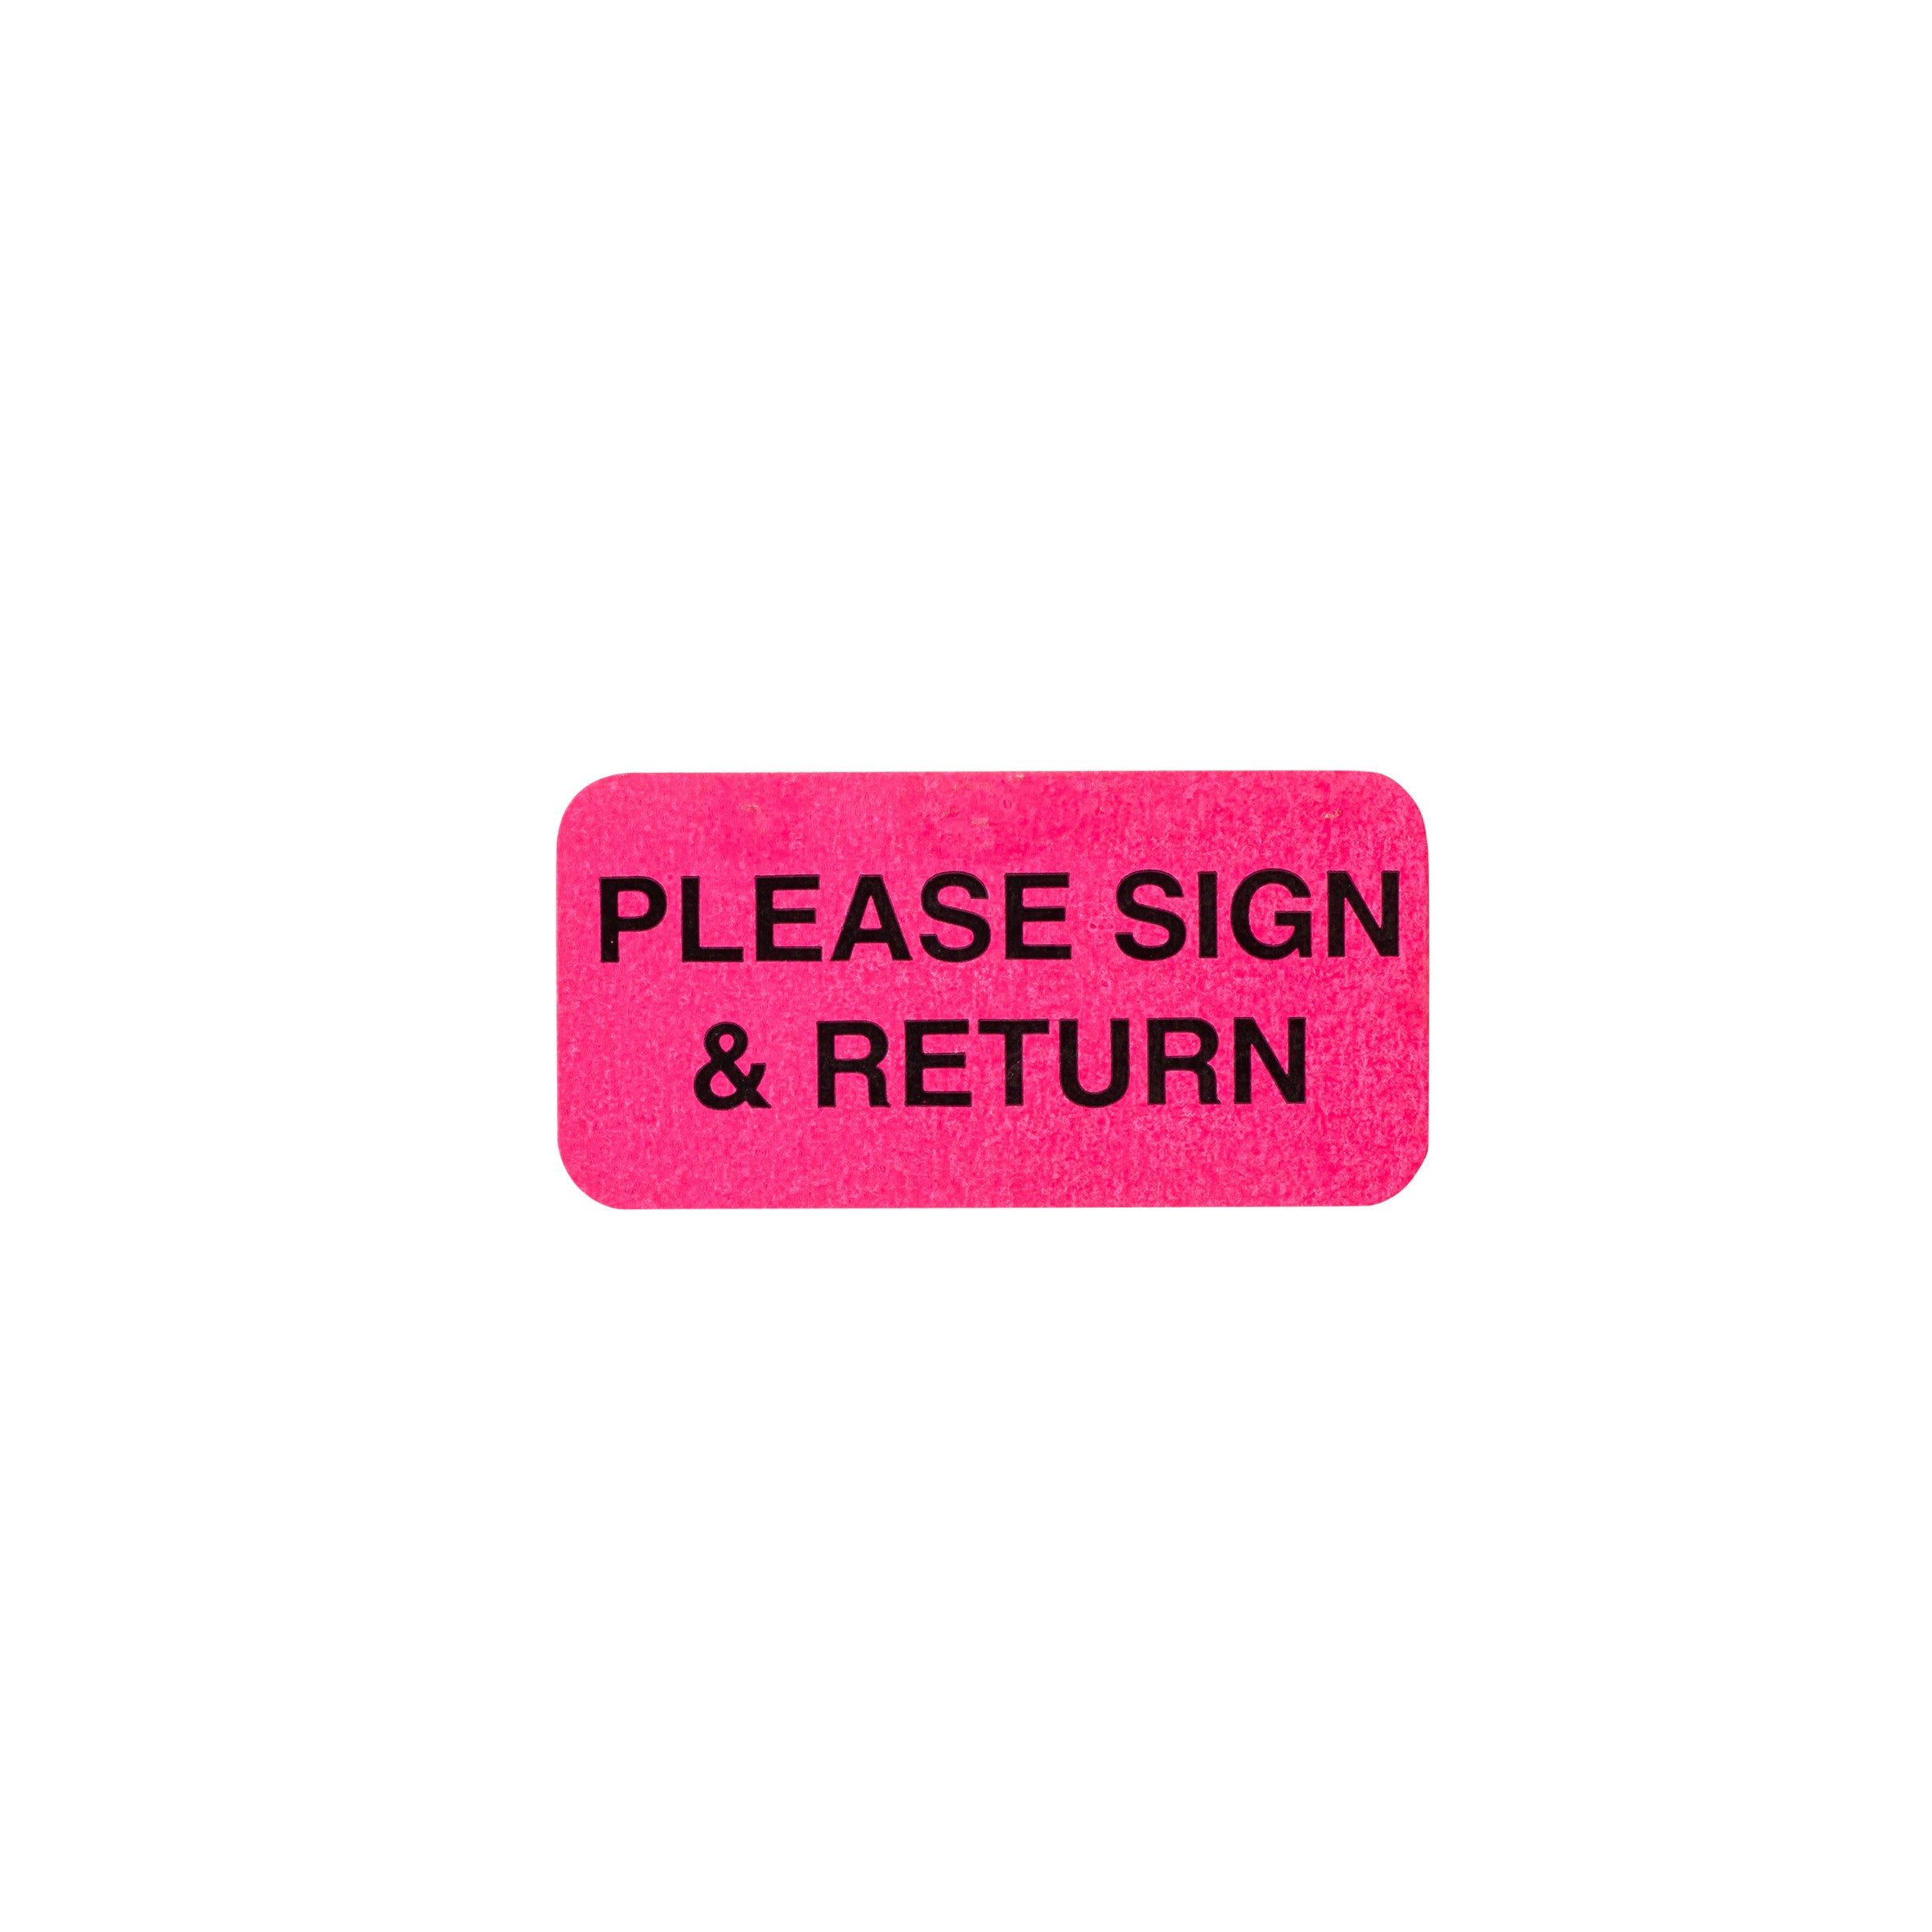 Please Sign Alert and Instruction Labels, Pink, W1.5" x H.75" (Roll of 100)